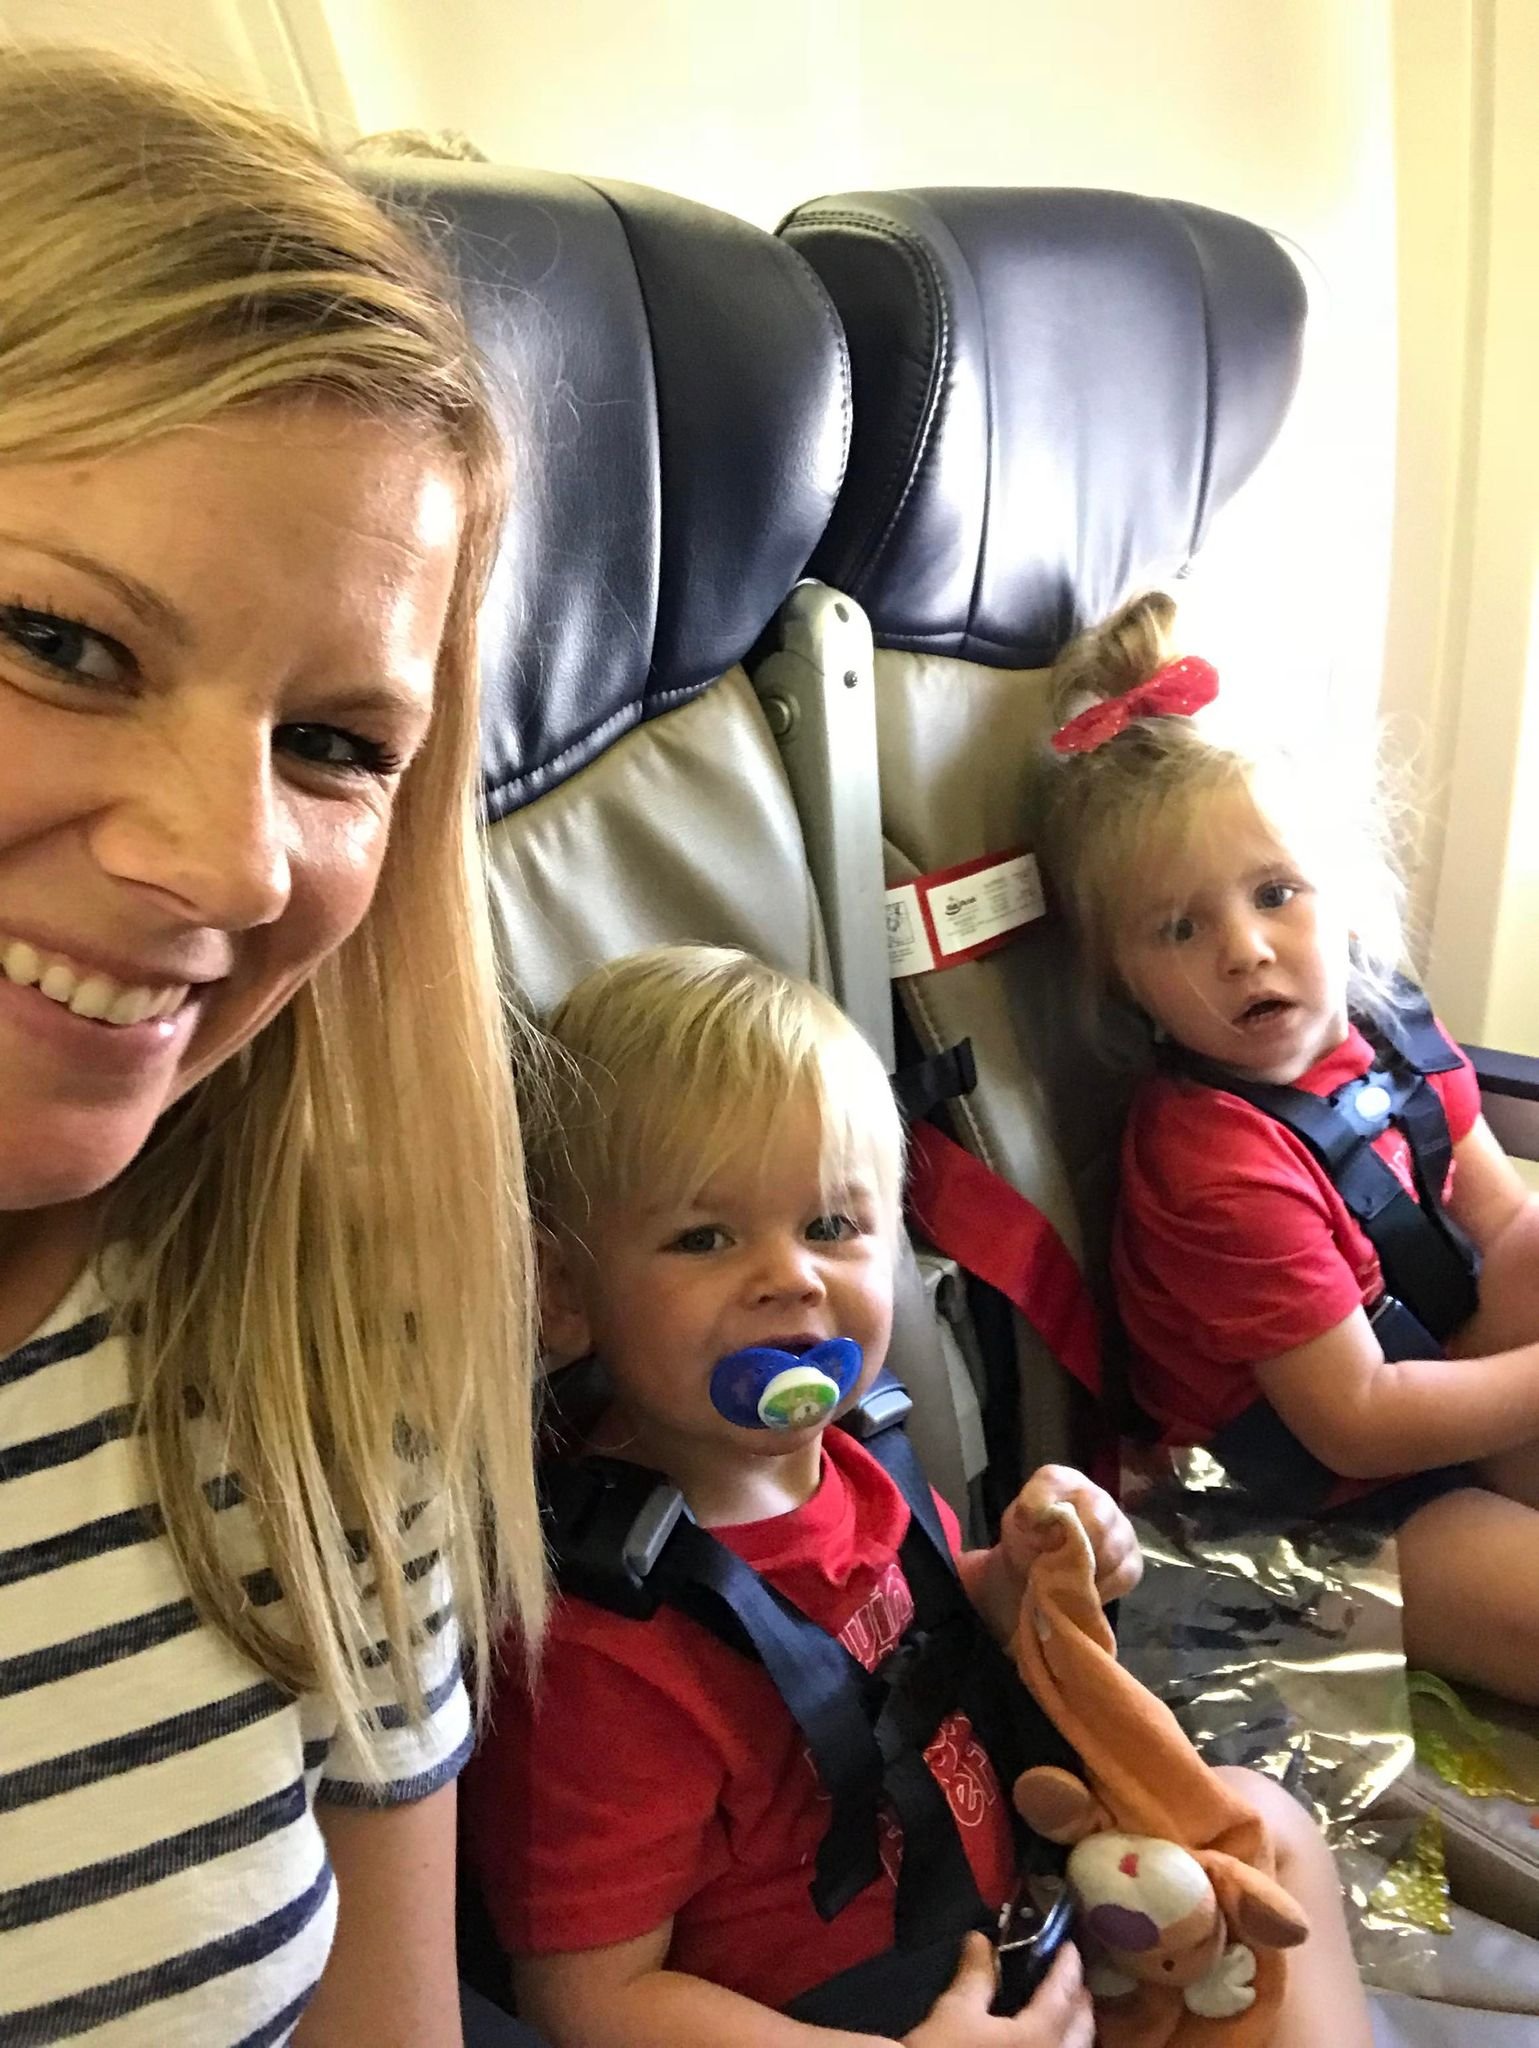 15 Awesome Ways to Entertain a Toddler on a Plane or in the Car! — Big  Brave Nomad